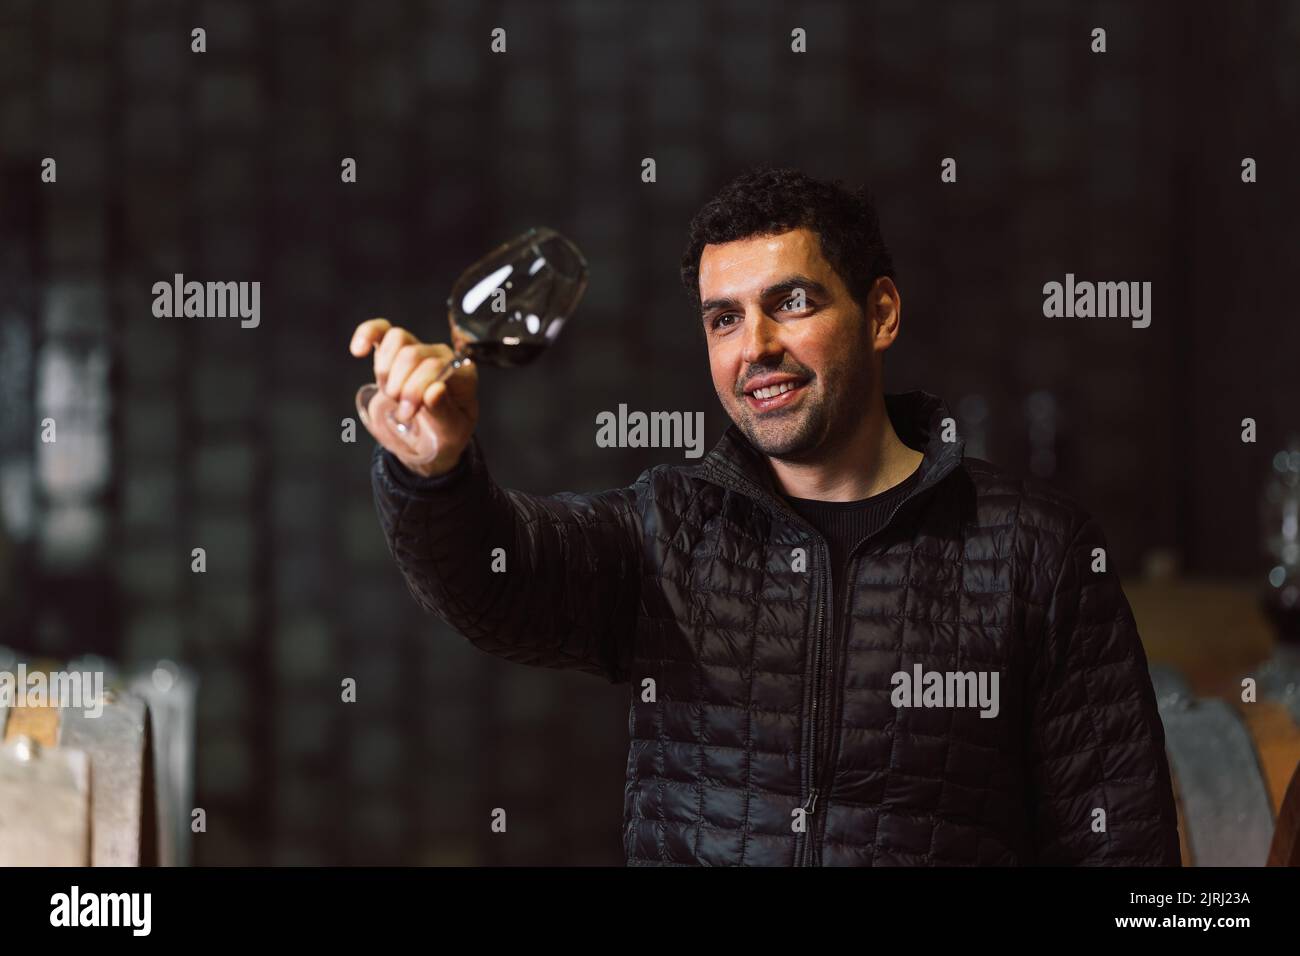 Man tasting red wine in a winery barrel cellar, holding a wine glass, swirling it, smelling, and sipping wine, delighted with wine taste and flavor. Stock Photo